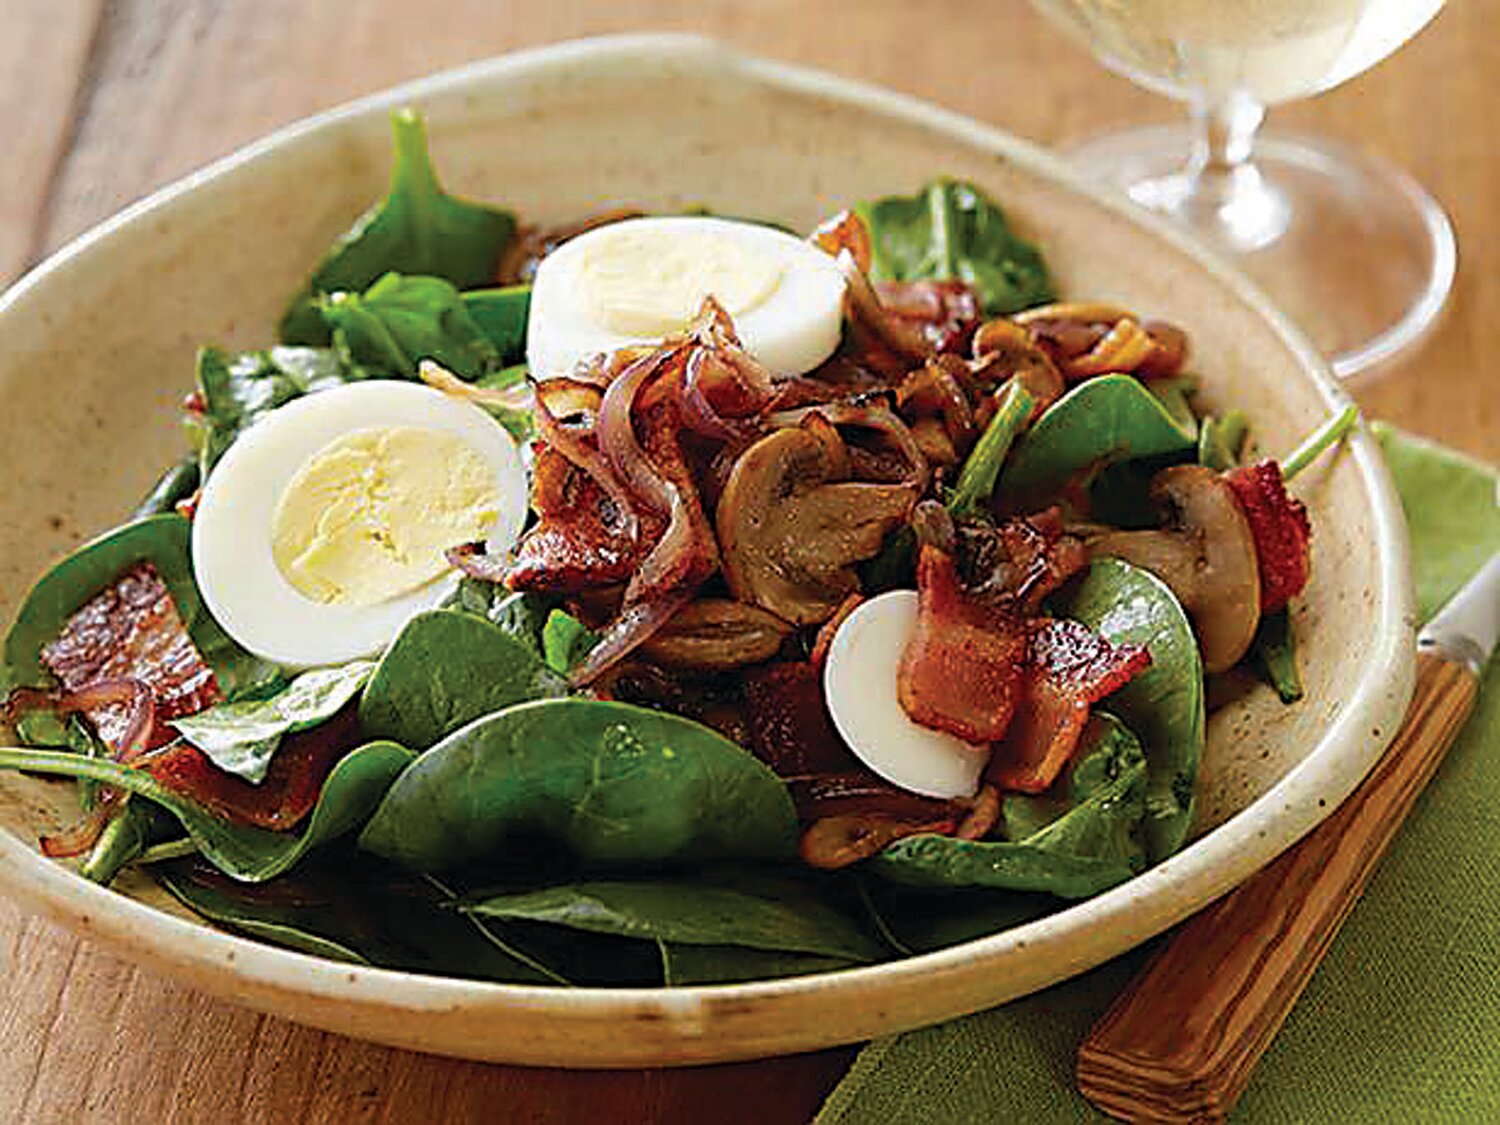 Warm dressing on a spinach salad makes a cold salad into a warm dish.